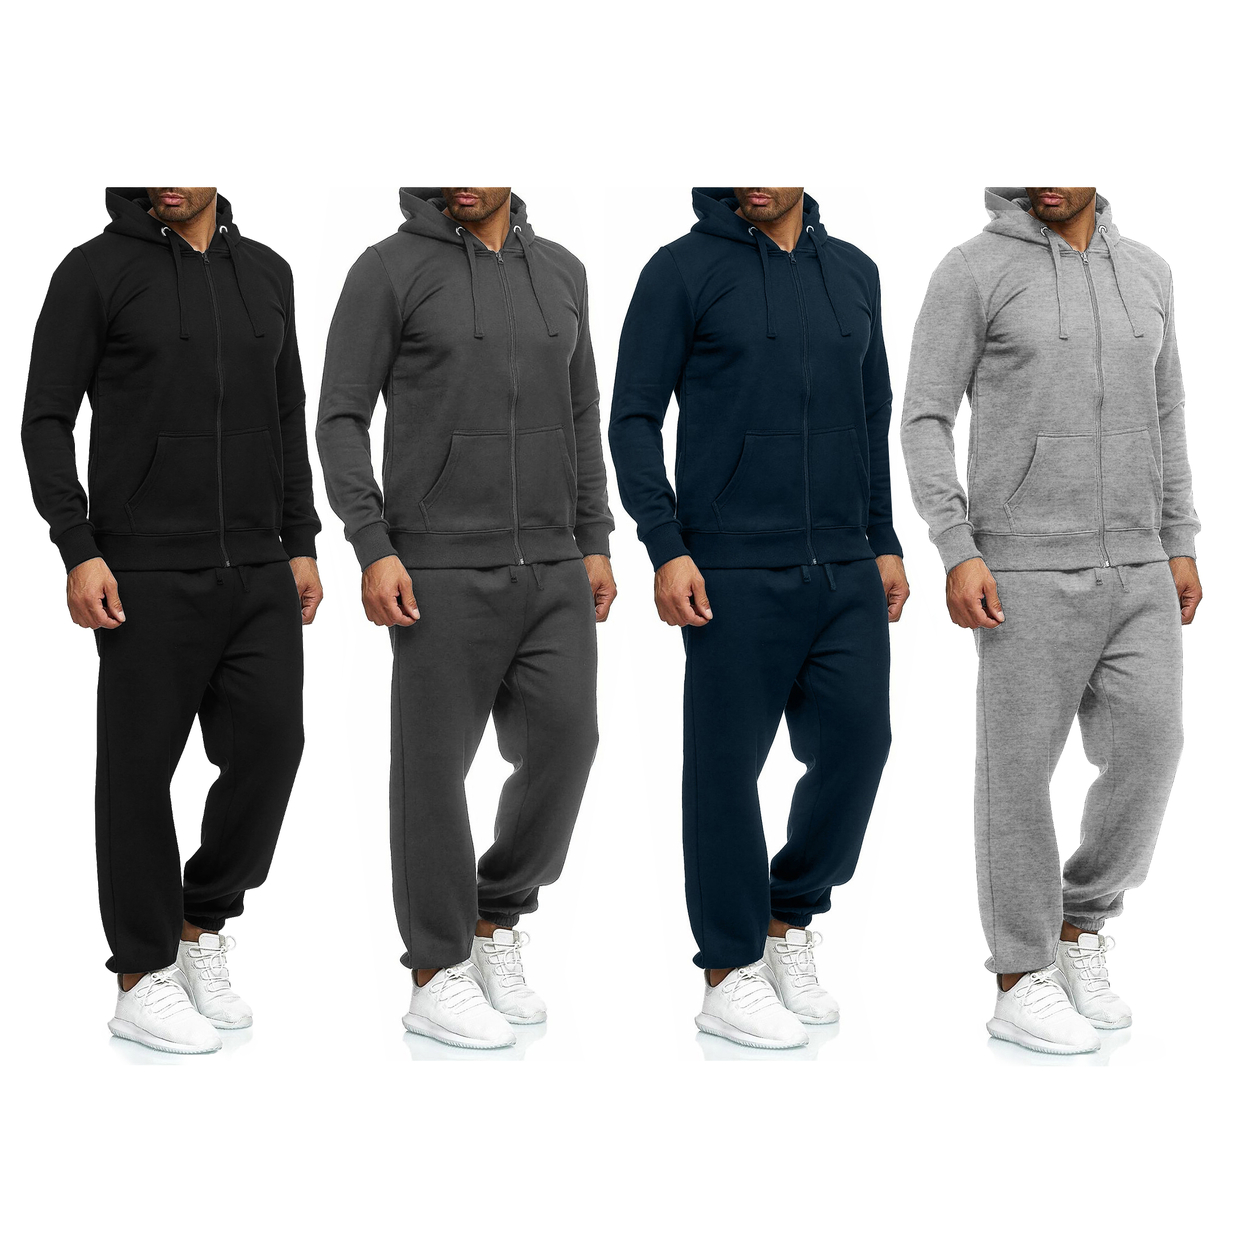 Multi-Pack: Men's Casual Big & Tall Athletic Active Winter Warm Fleece Lined Full Zip Tracksuit Jogger Set - Grey, 1-pack, Small